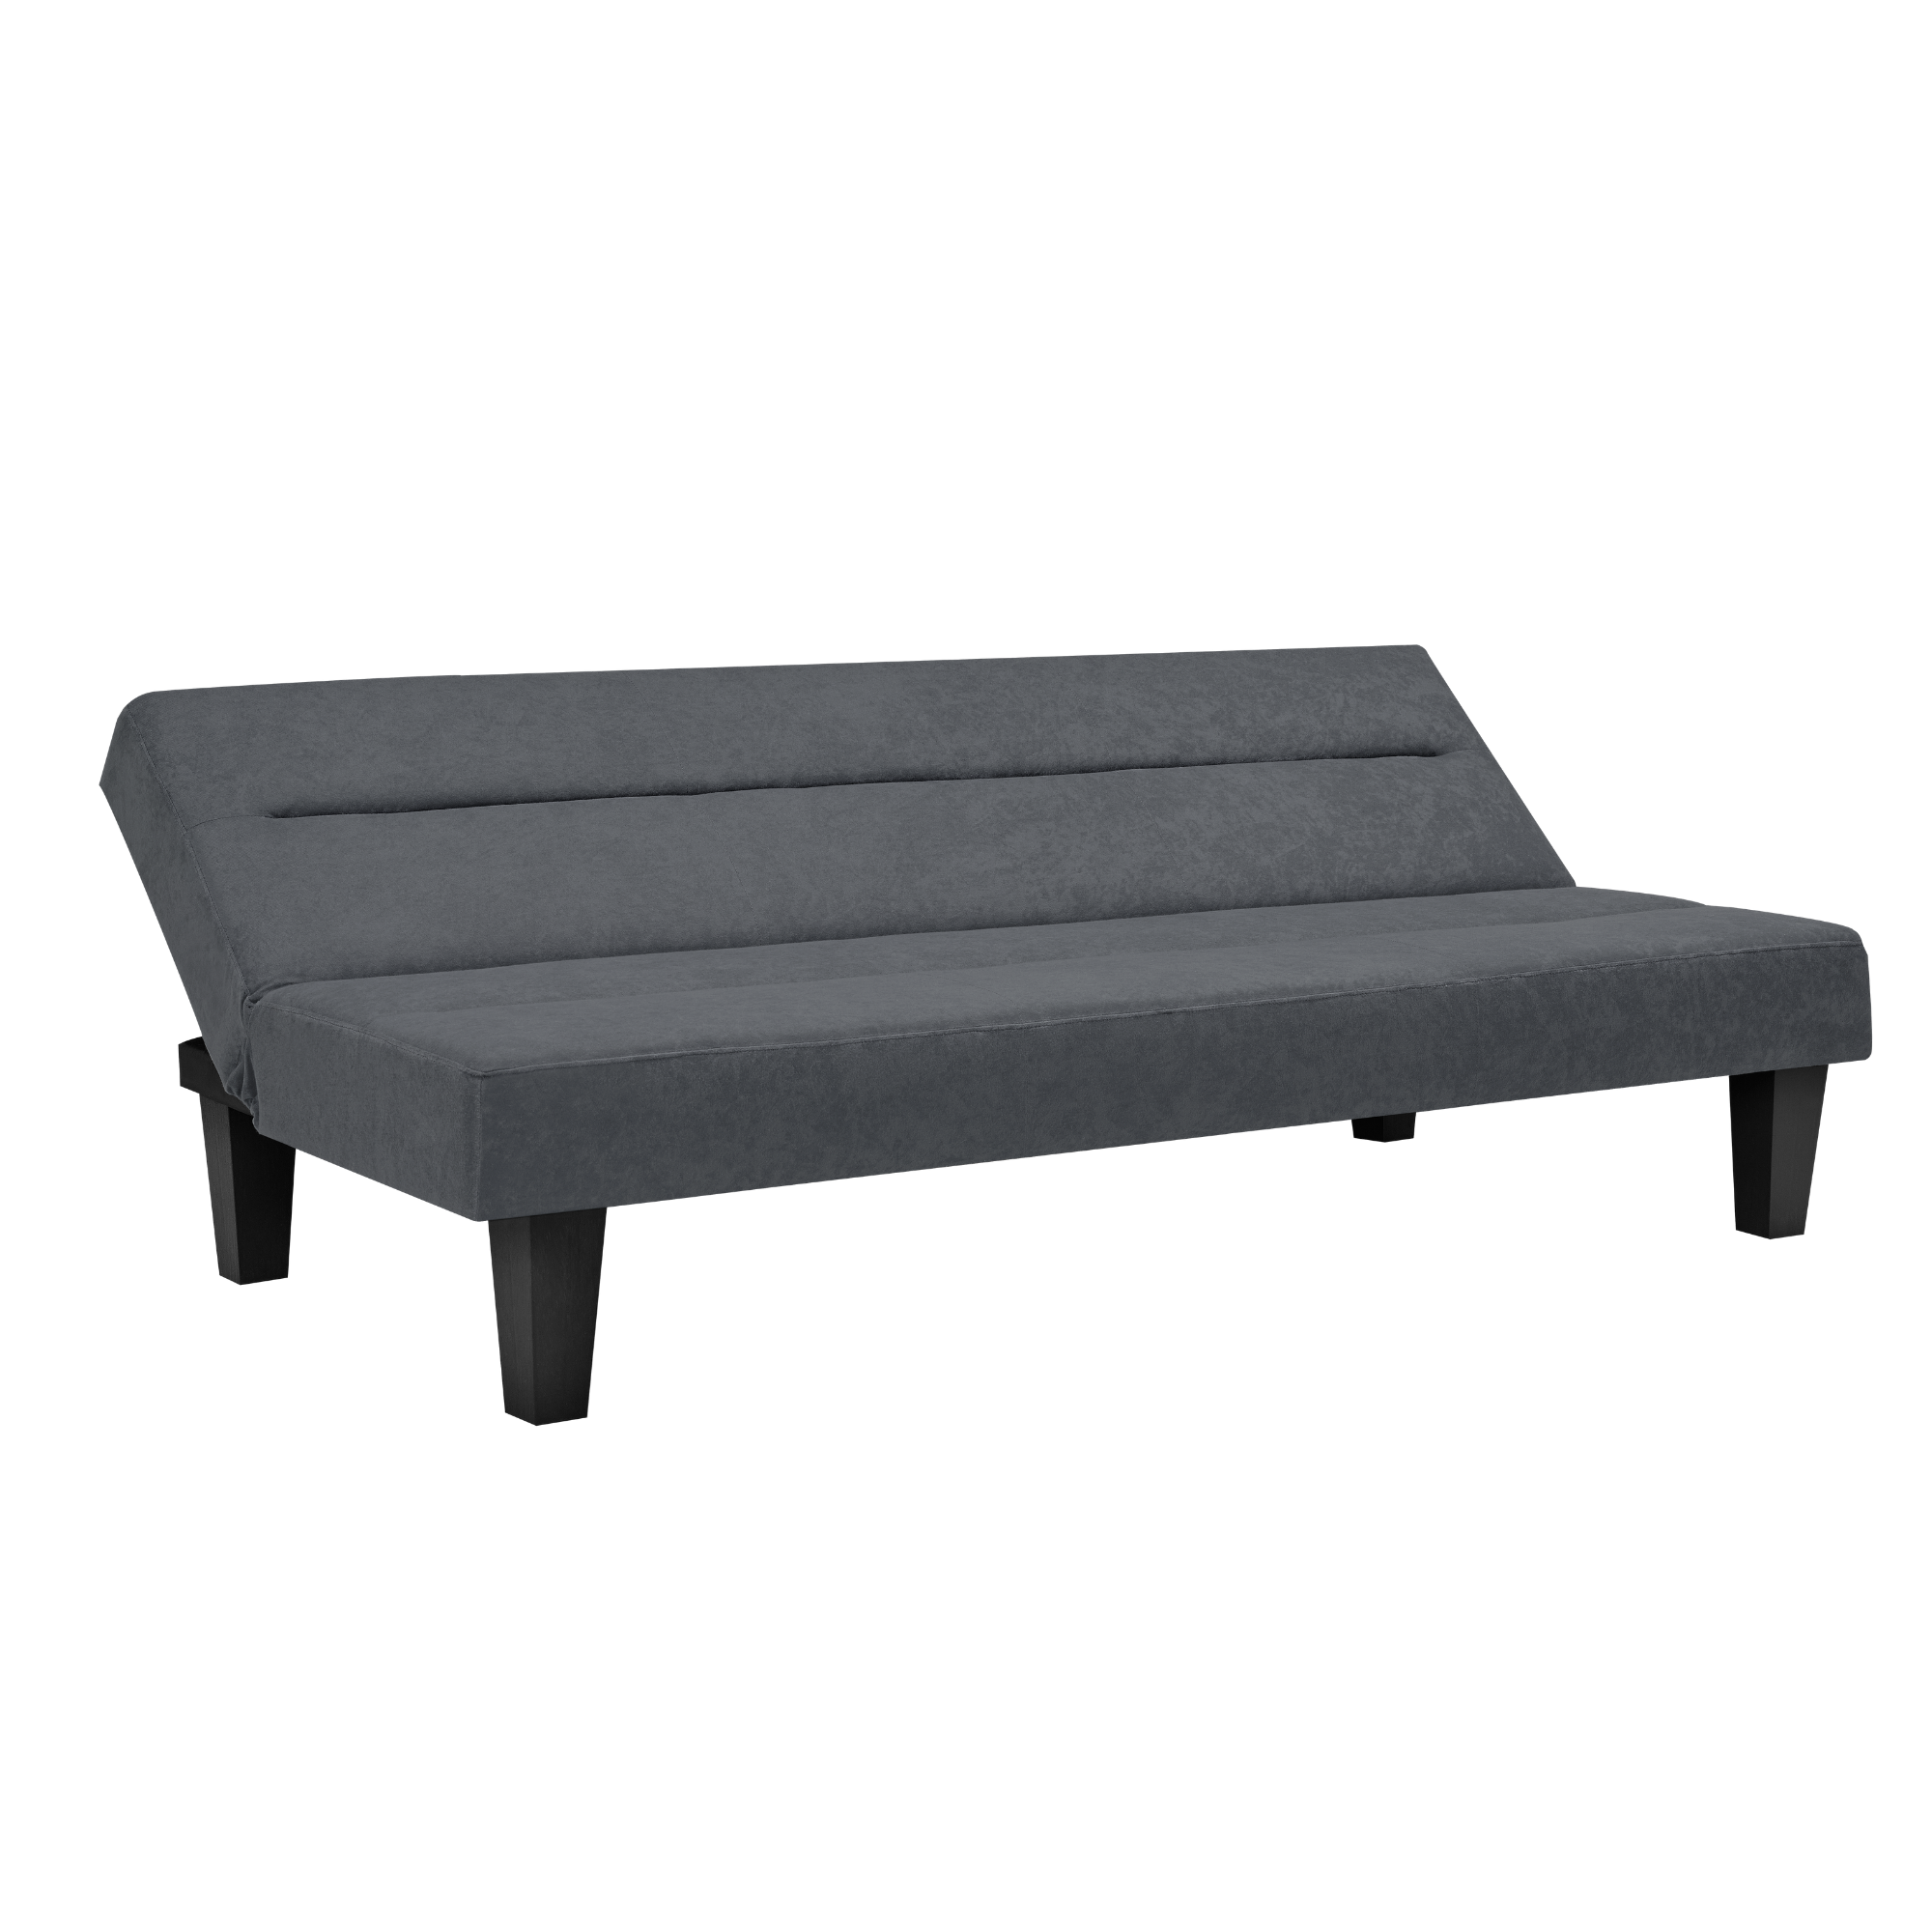 DHP Kebo Futon with Microfiber Cover, Gray Microfiber - image 5 of 14